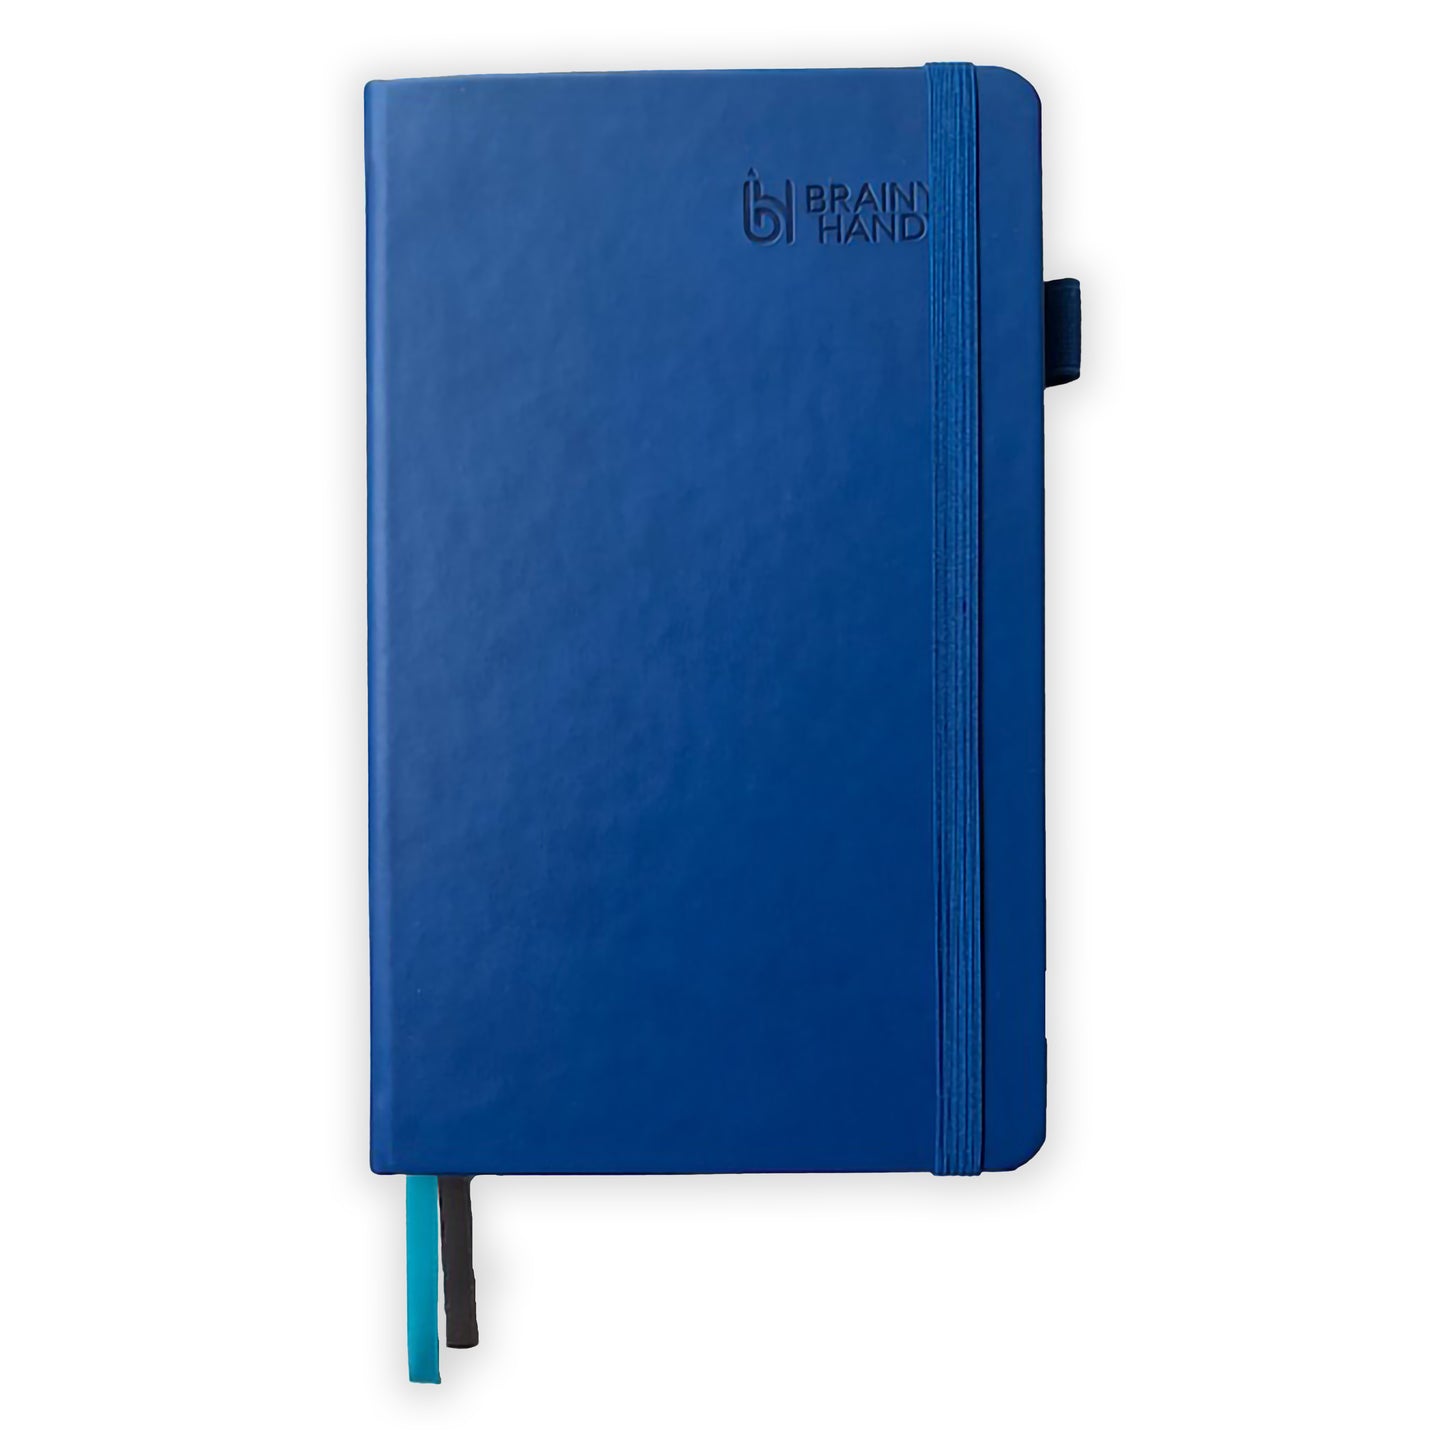 All in One Personal Information Notebook